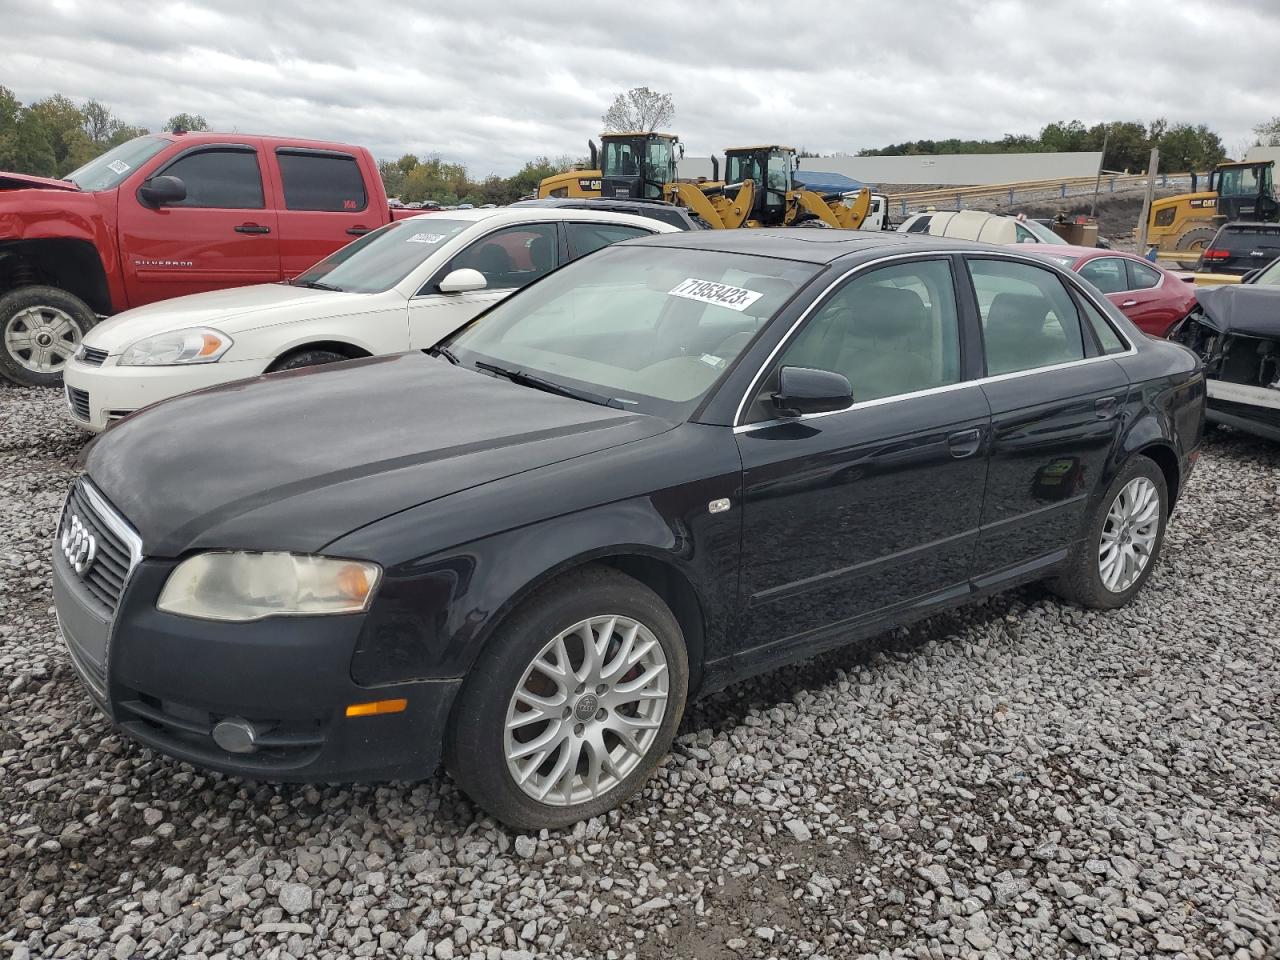 WAUAF78E48A****** Salvage and Wrecked 2008 Audi A4 in AL - Hueytown